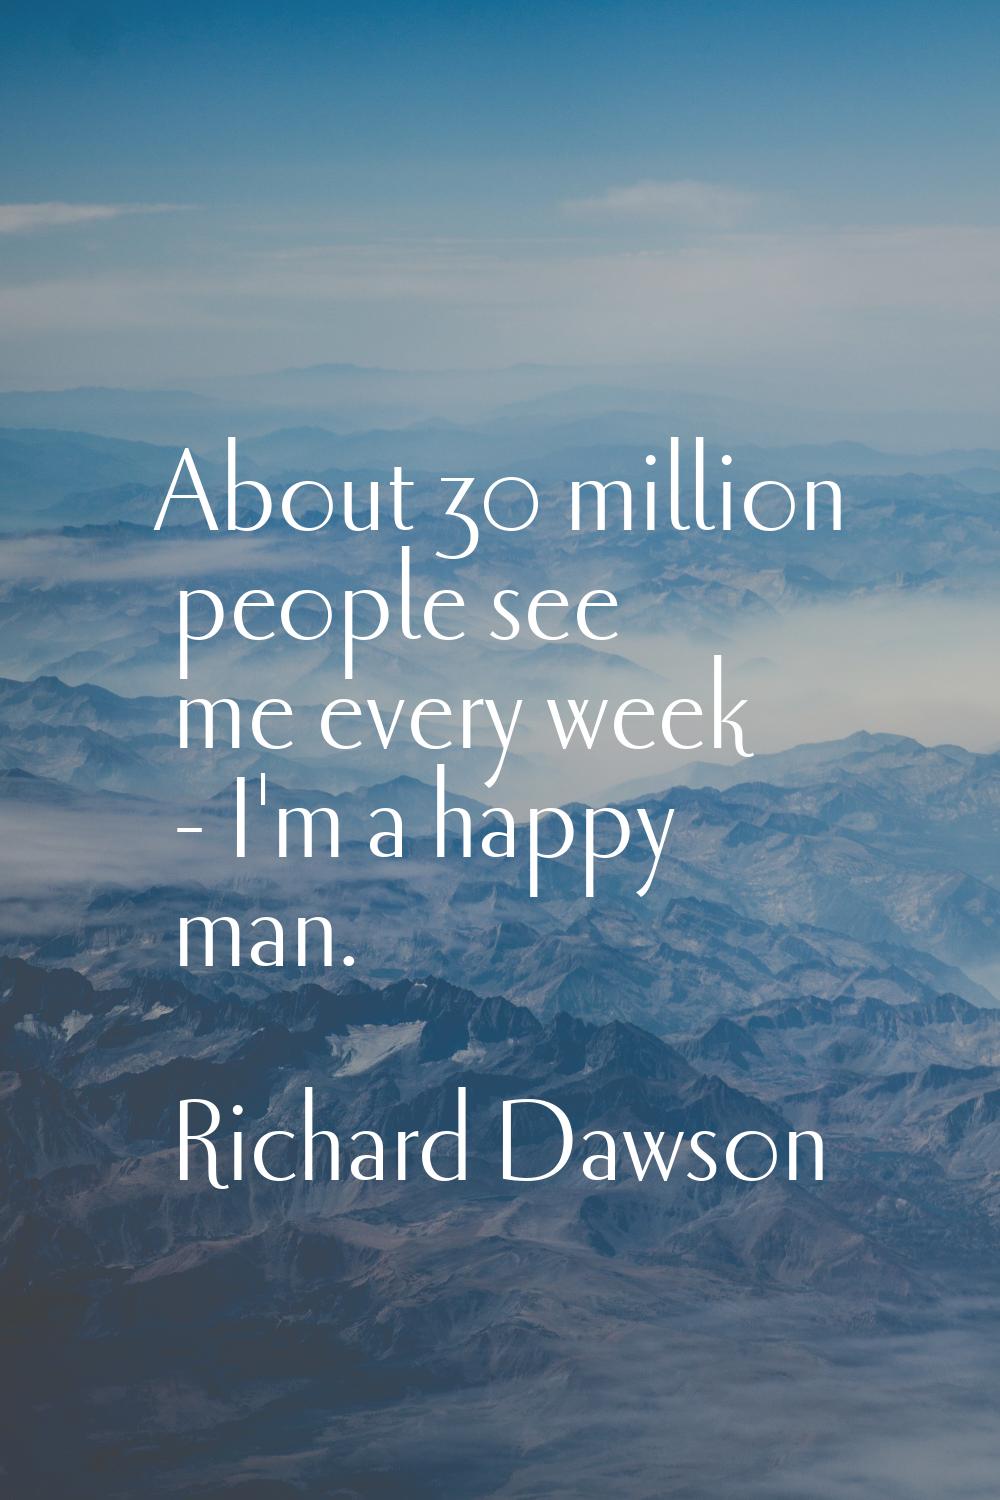 About 30 million people see me every week - I'm a happy man.